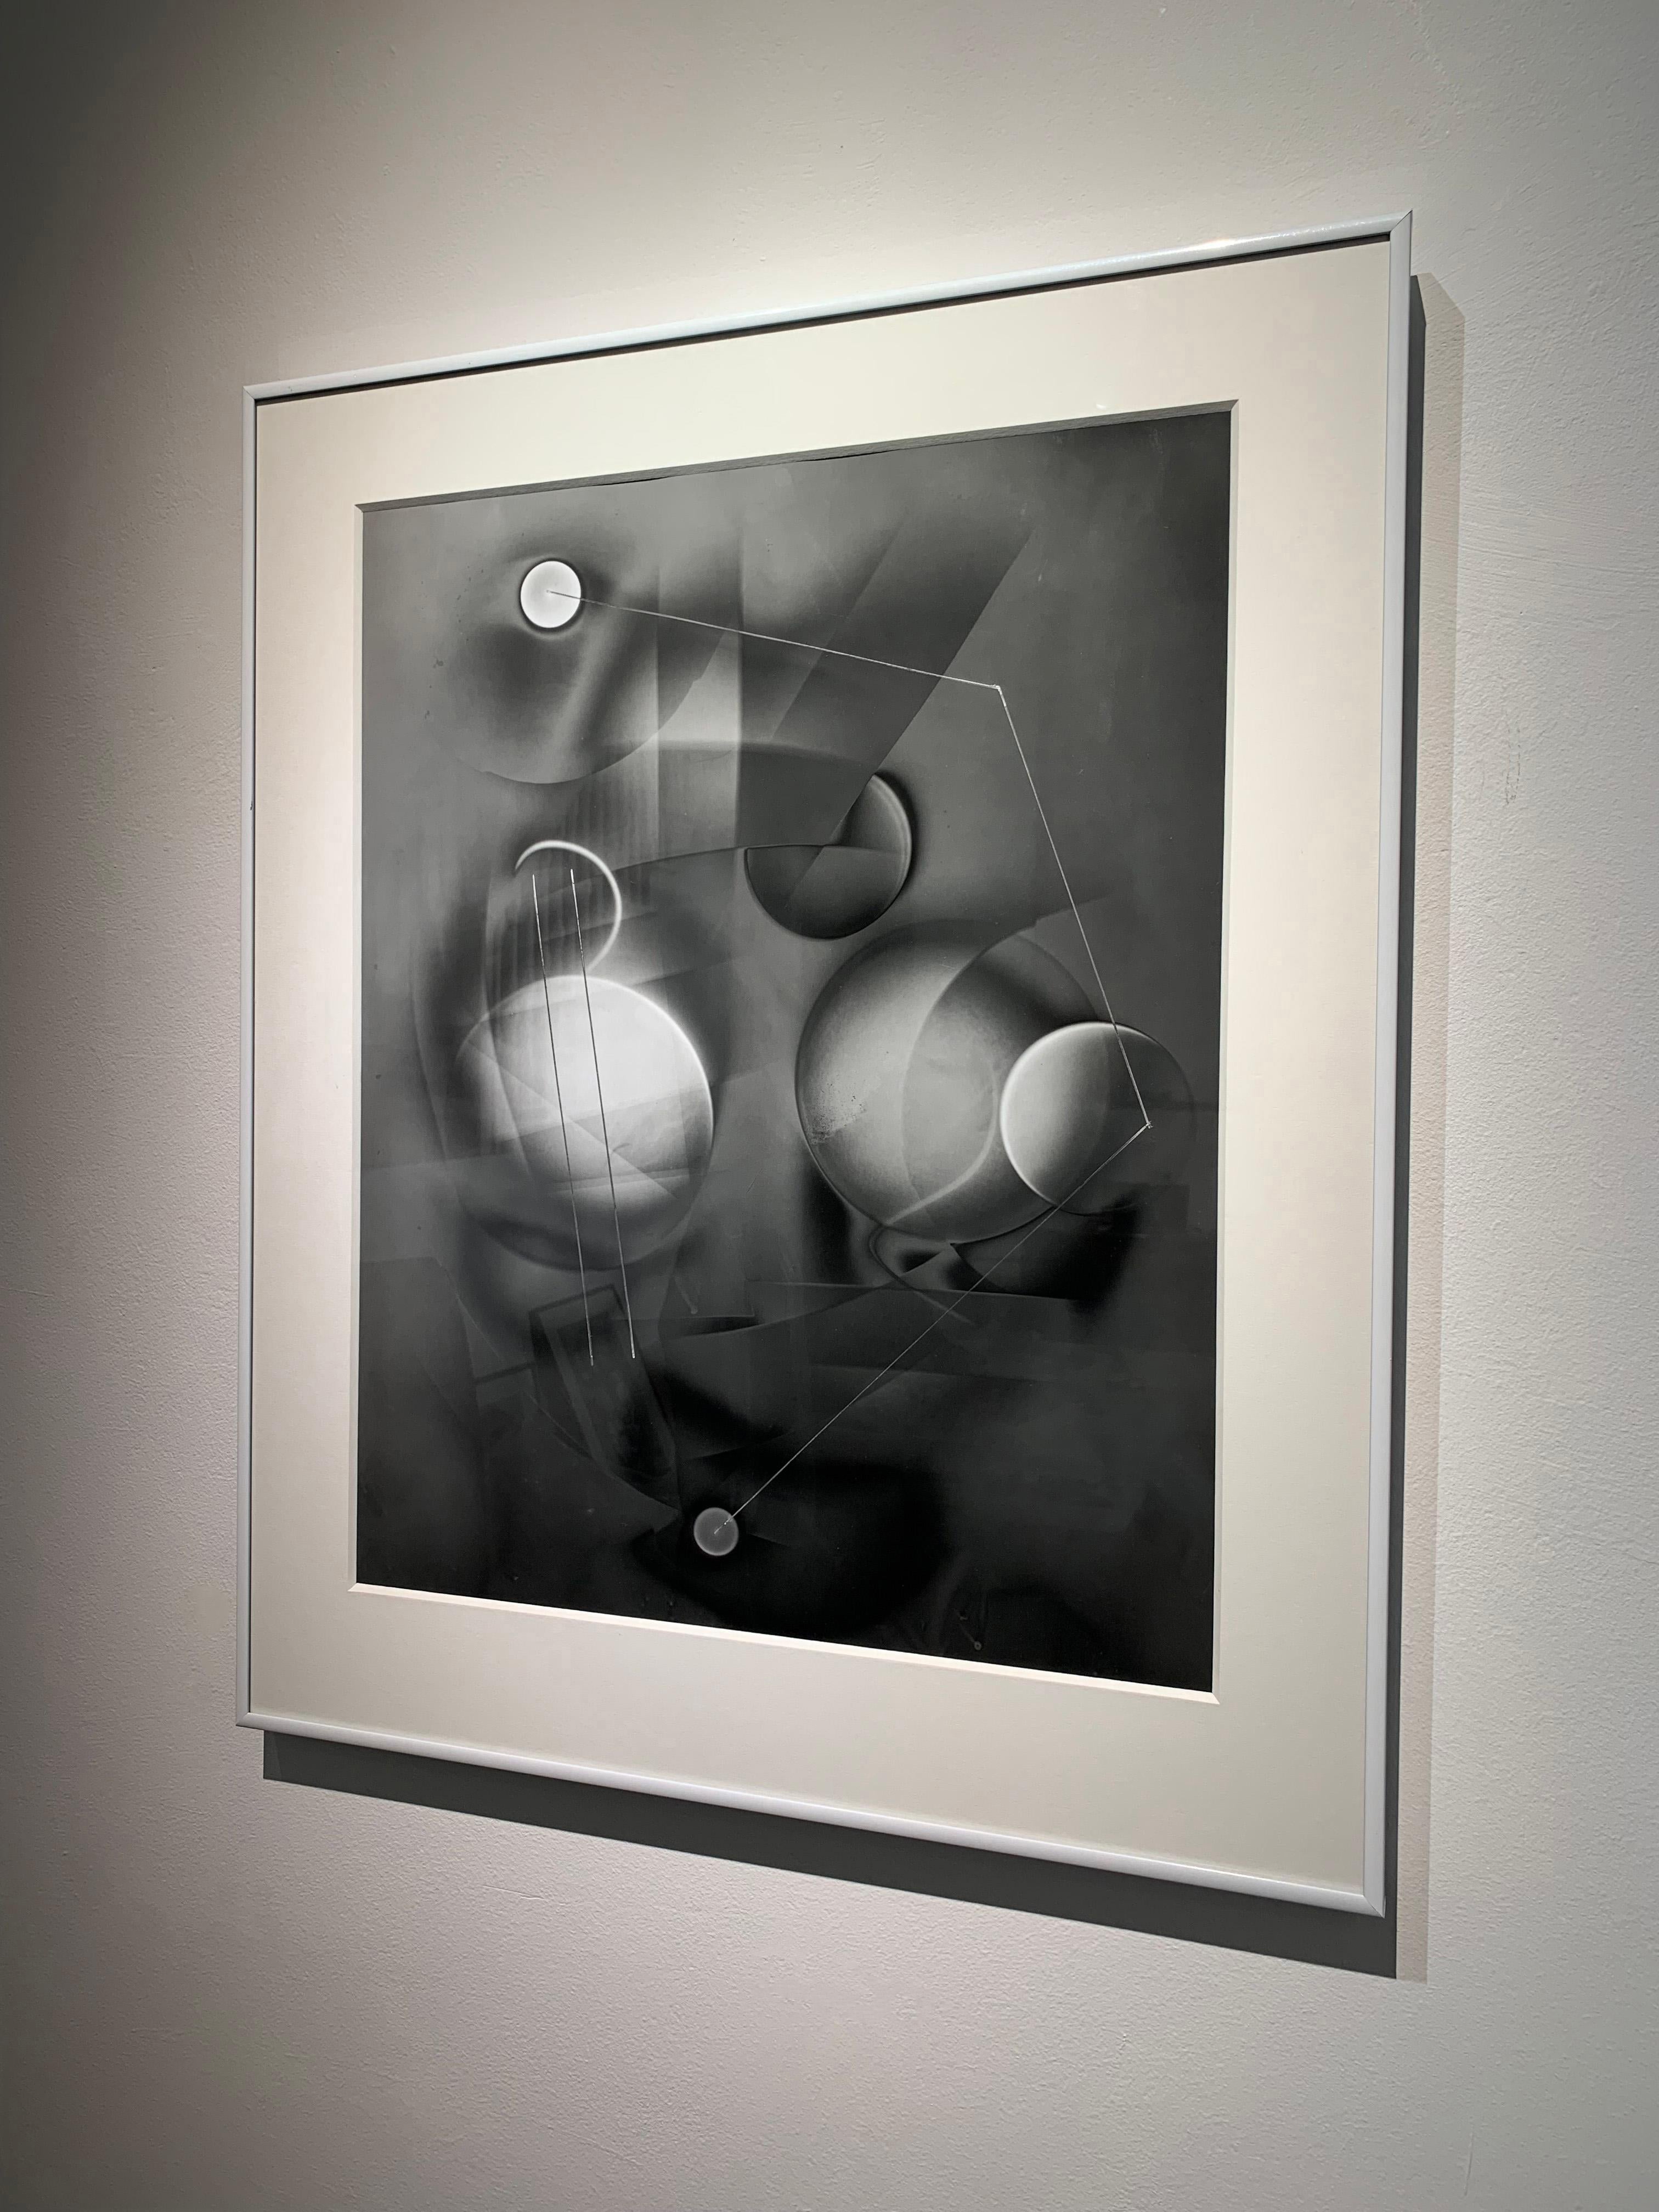 NEAR THE CHURCH, 2016
Unique Luminogram Silver Gelatin Print, Framed; Framing options available, also can be shipped unframed if preferable
Framed; museum mount board, white metal frame with antireflective art glass
40.6 x 50.8 cm/ 16 x 20